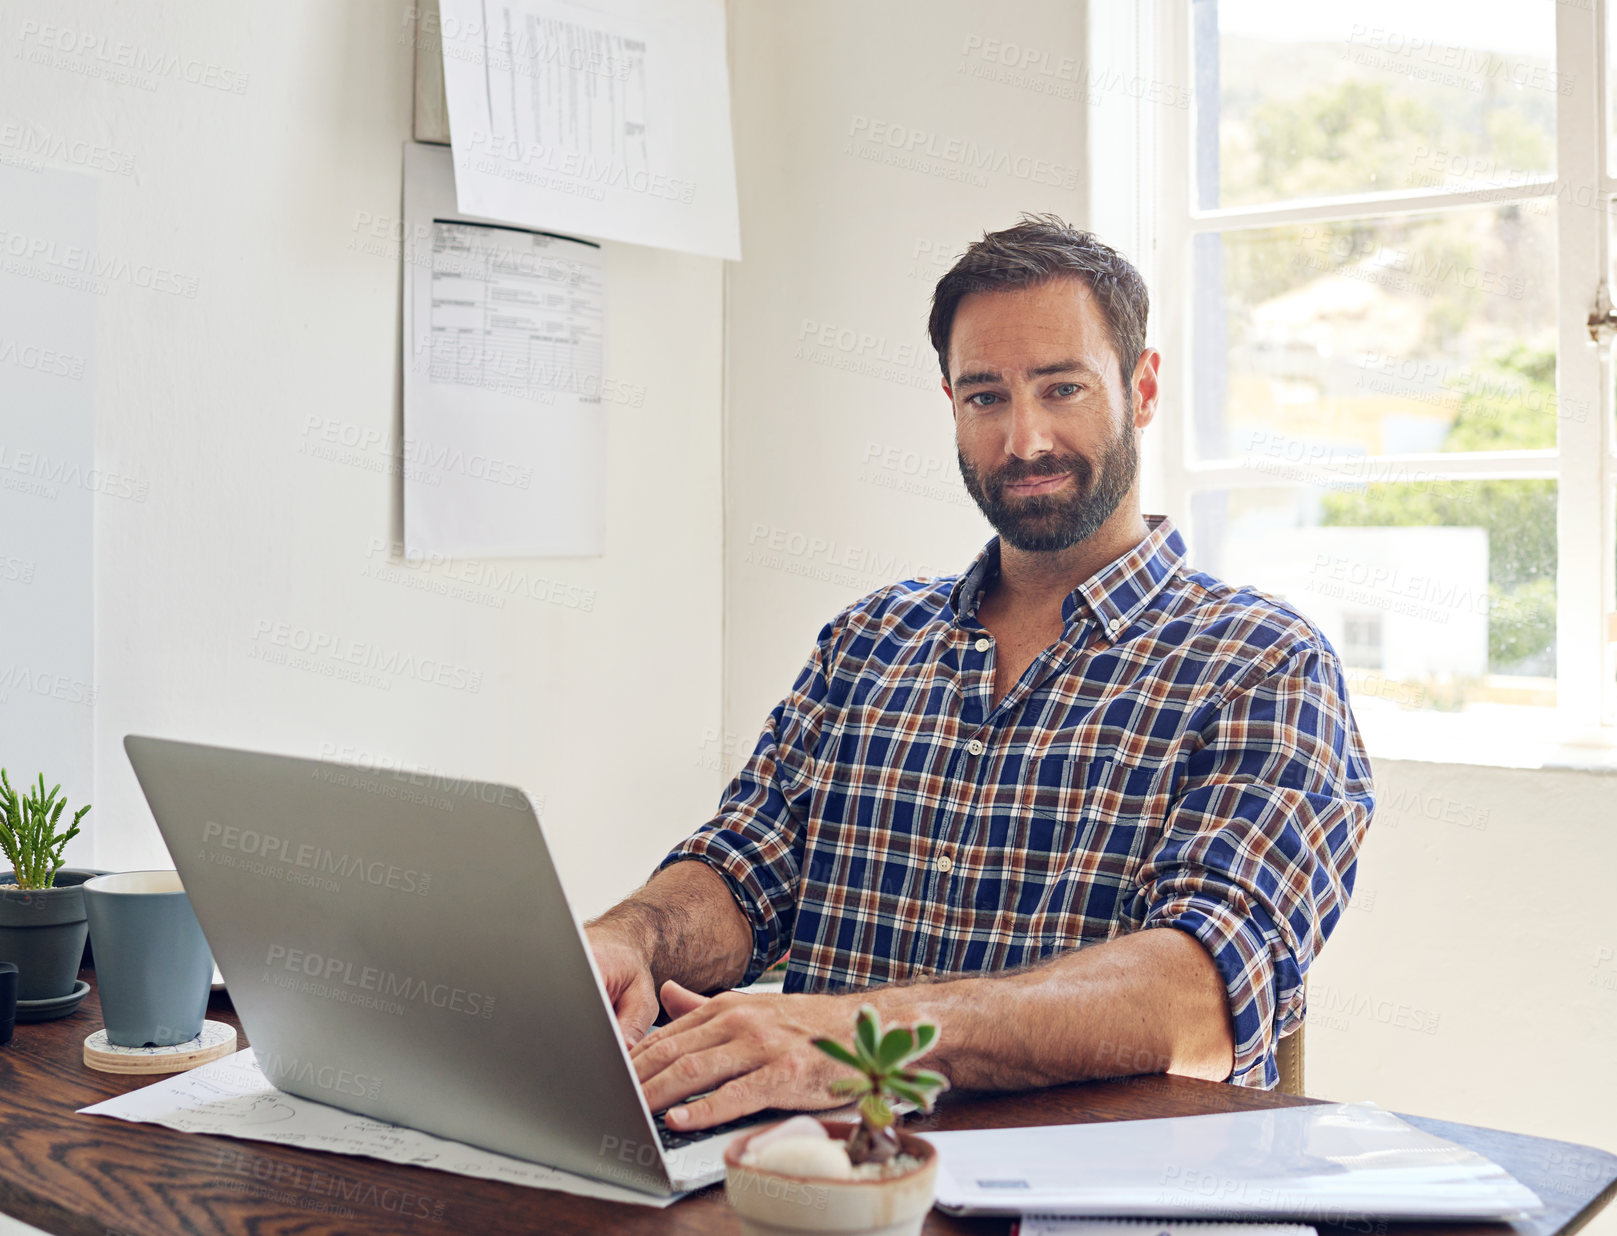 Buy stock photo Portrait of a man sitting at a desk working on a laptop